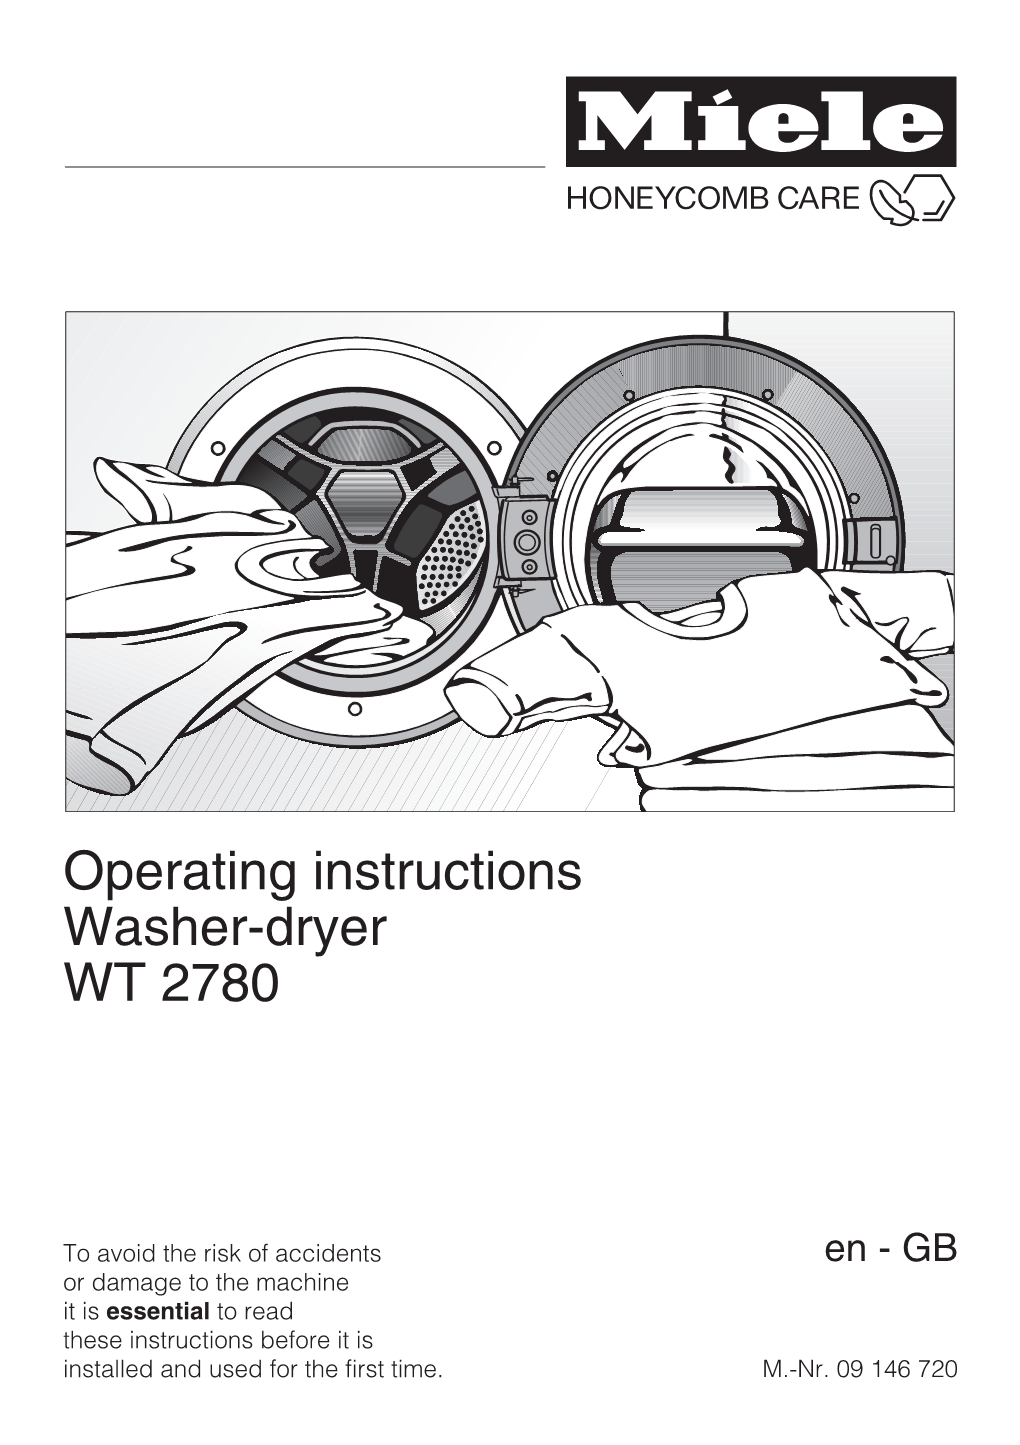 Operating Instructions Washer-Dryer WT 2780